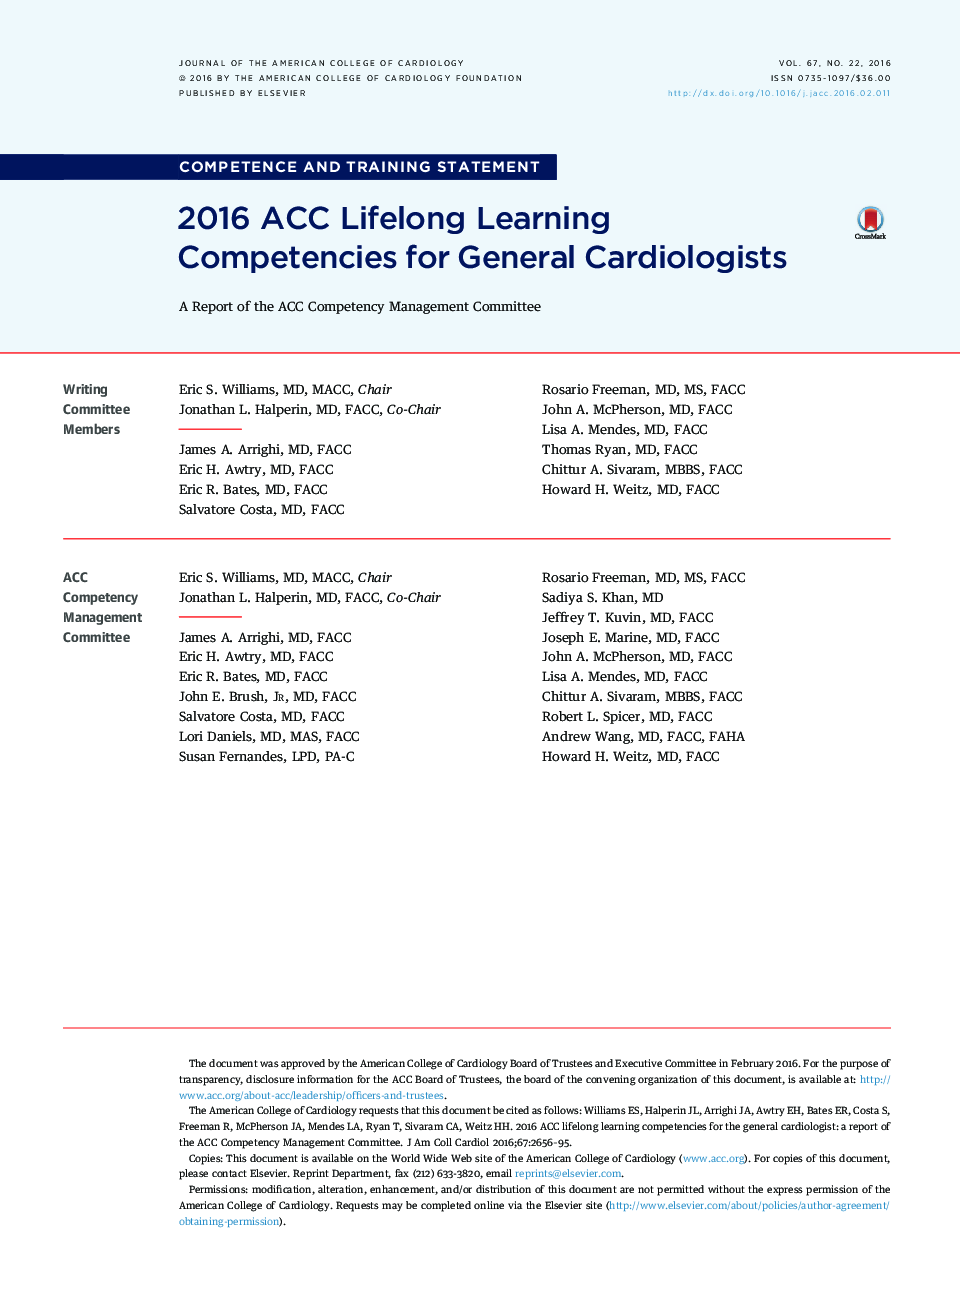 2016 ACC Lifelong Learning Competencies for General Cardiologists